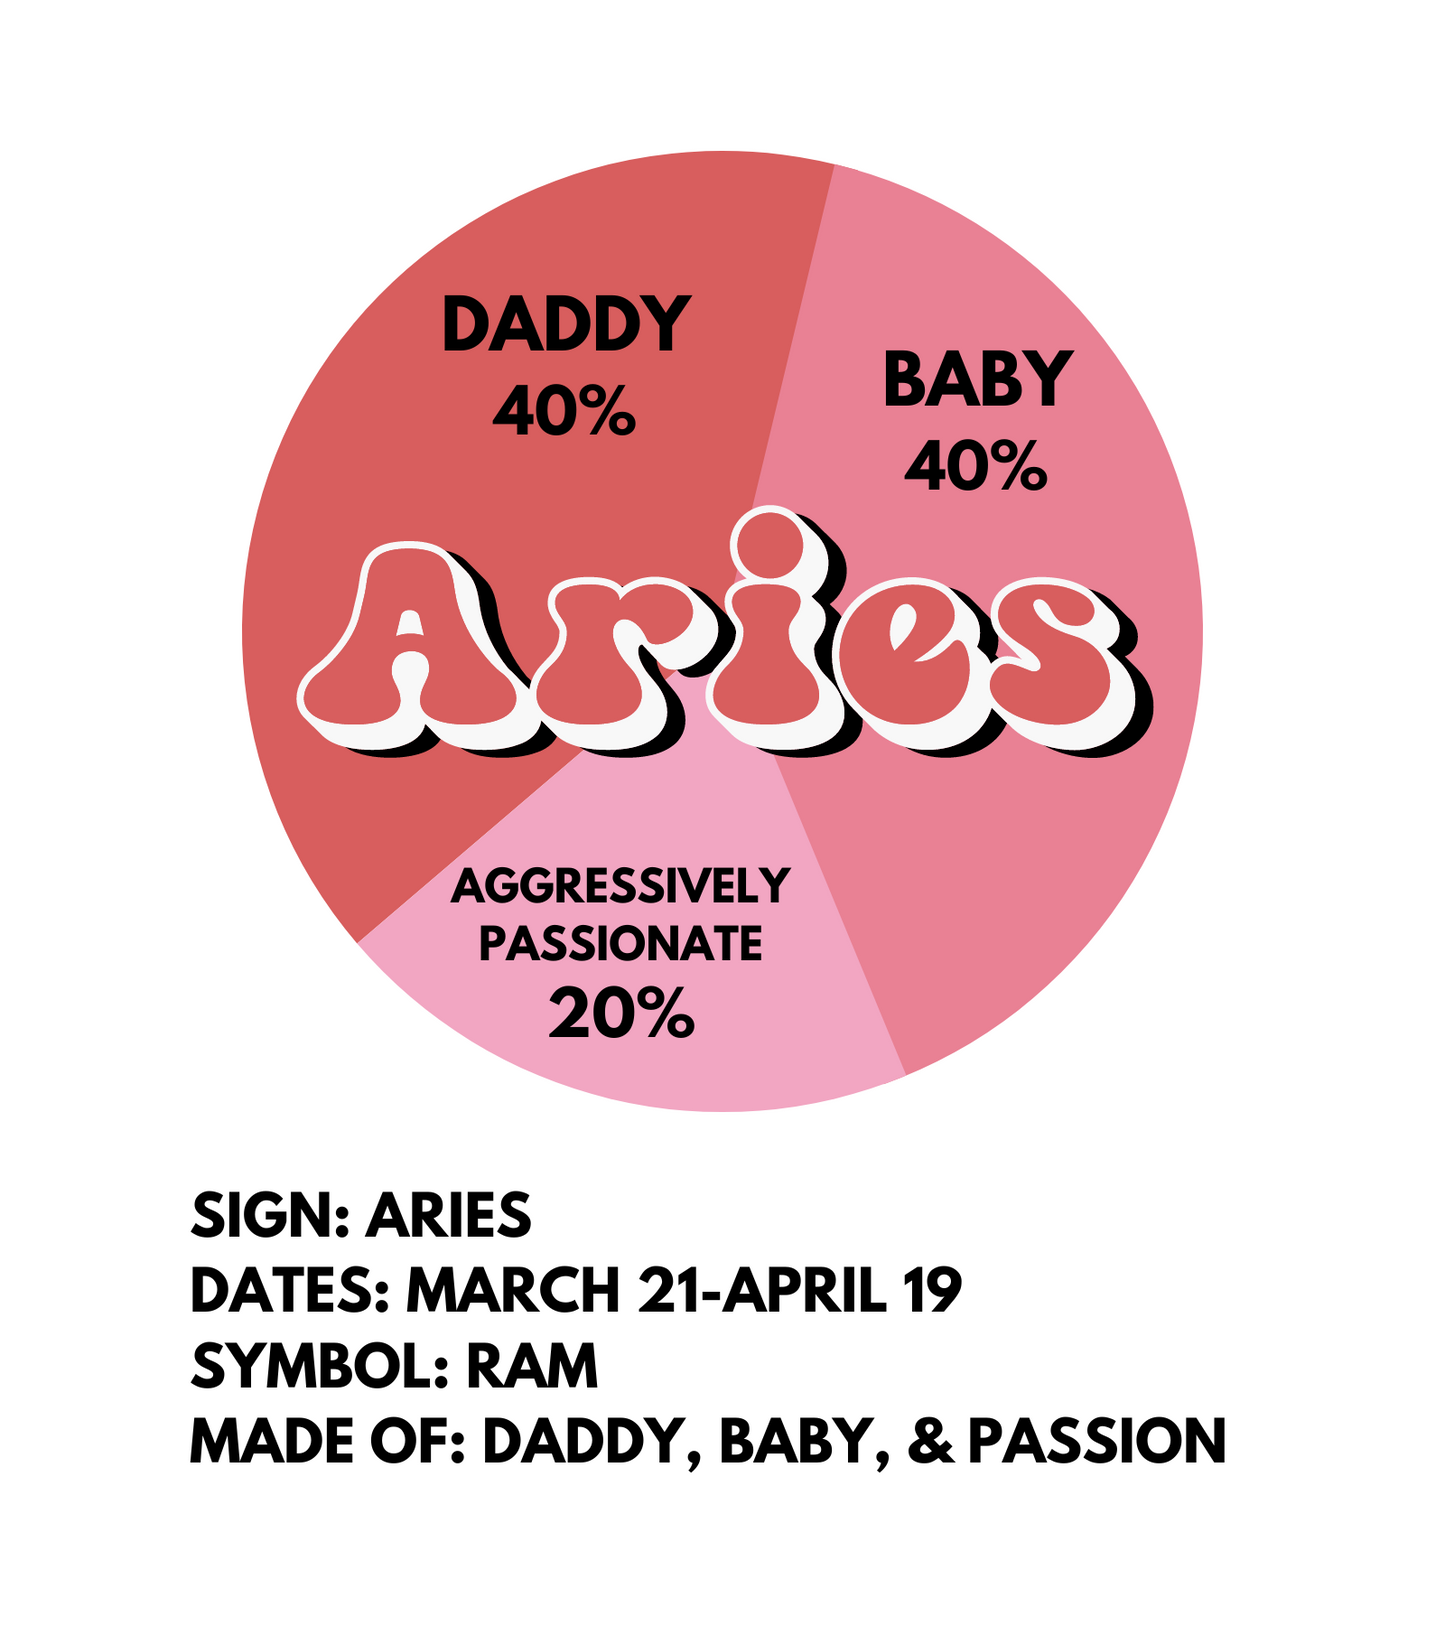 A circular sticker design of a pie chart, with the word Aries in the middle. The pie chart is broken up into 3 sections: 40% daddy, 40% baby, and 20% aggressively passionate. Underneath the design there is the text: SIGN: ARIES DATES: MARCH 21-APRIL 19 SYMBOL: RAM MADE OF: DADDY, BABY, & PASSION